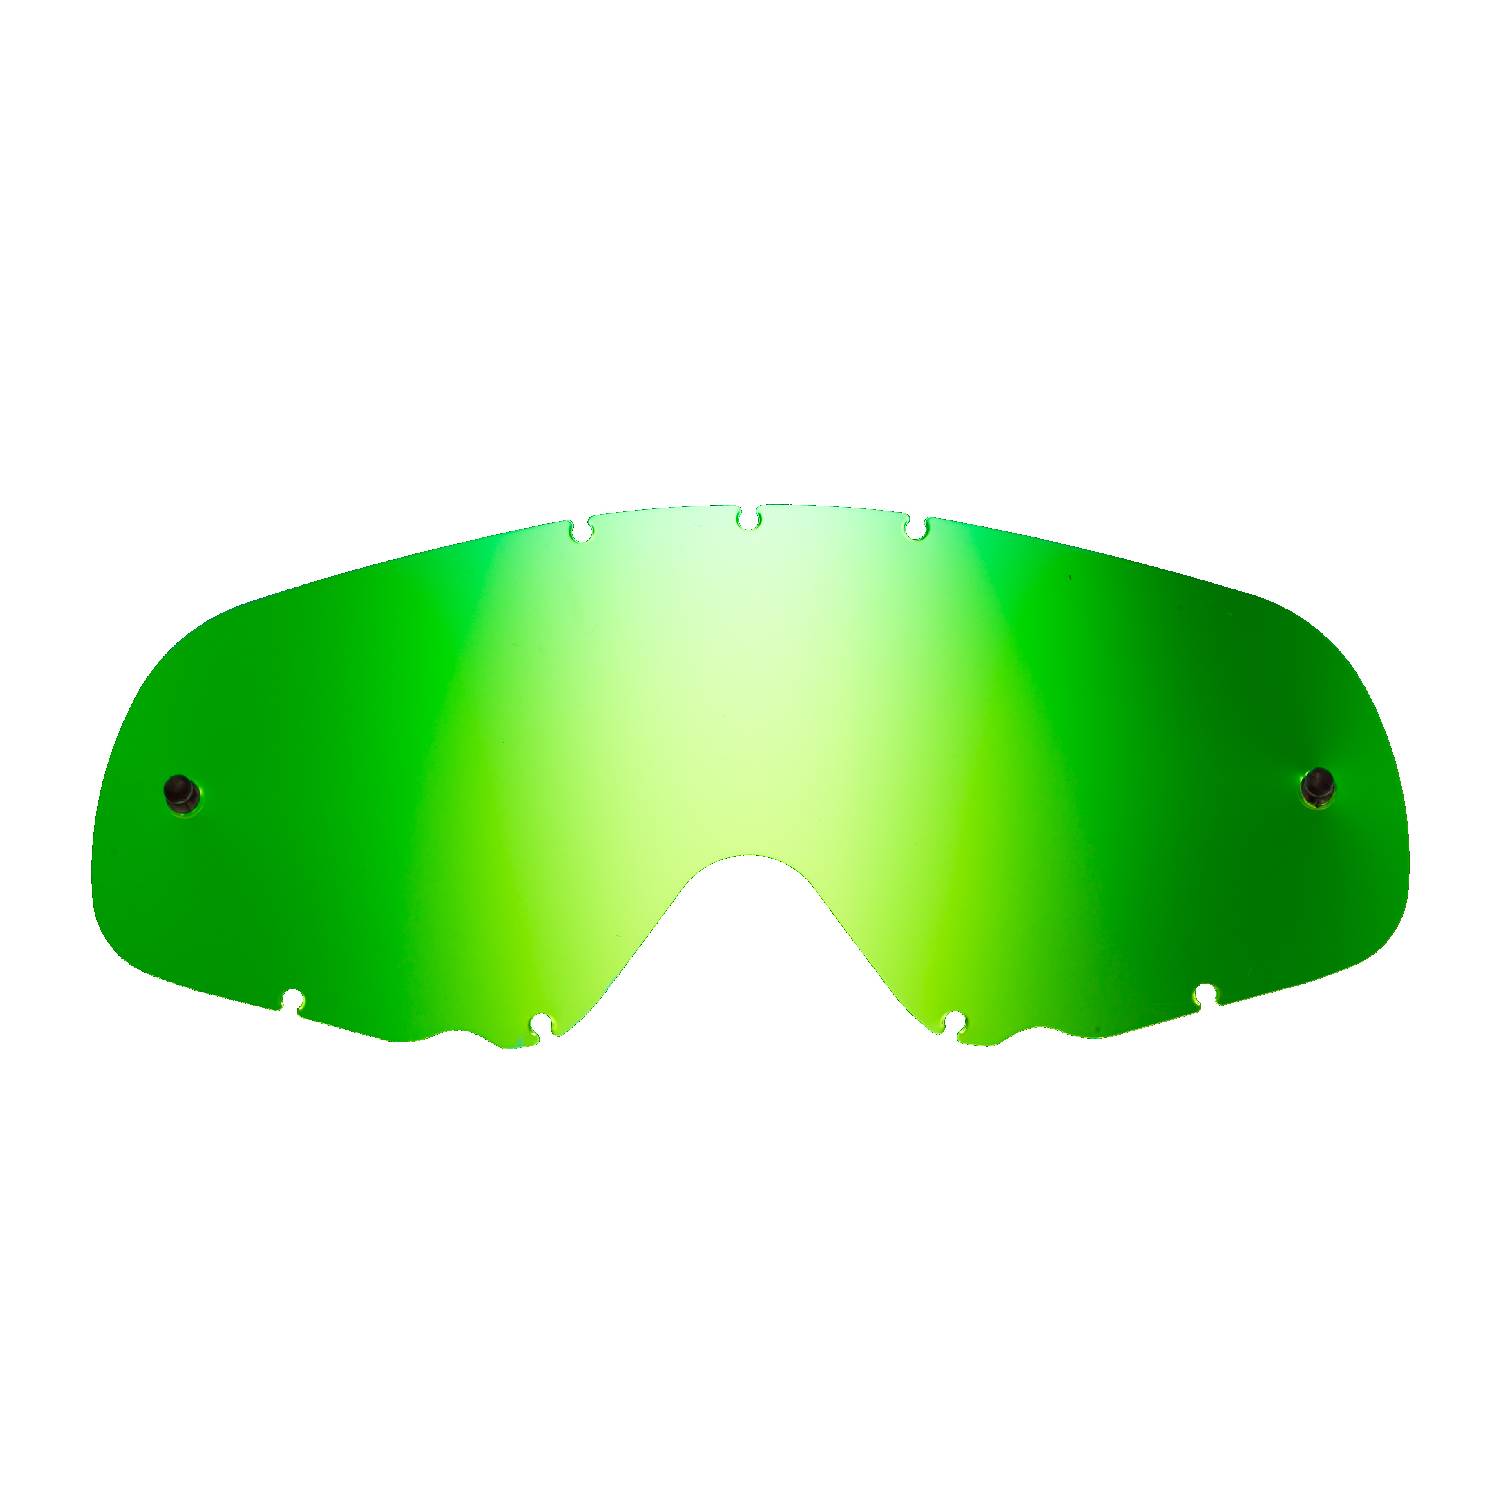 green-toned mirrored replacement lenses  compatible for Oakley Crowbar goggle